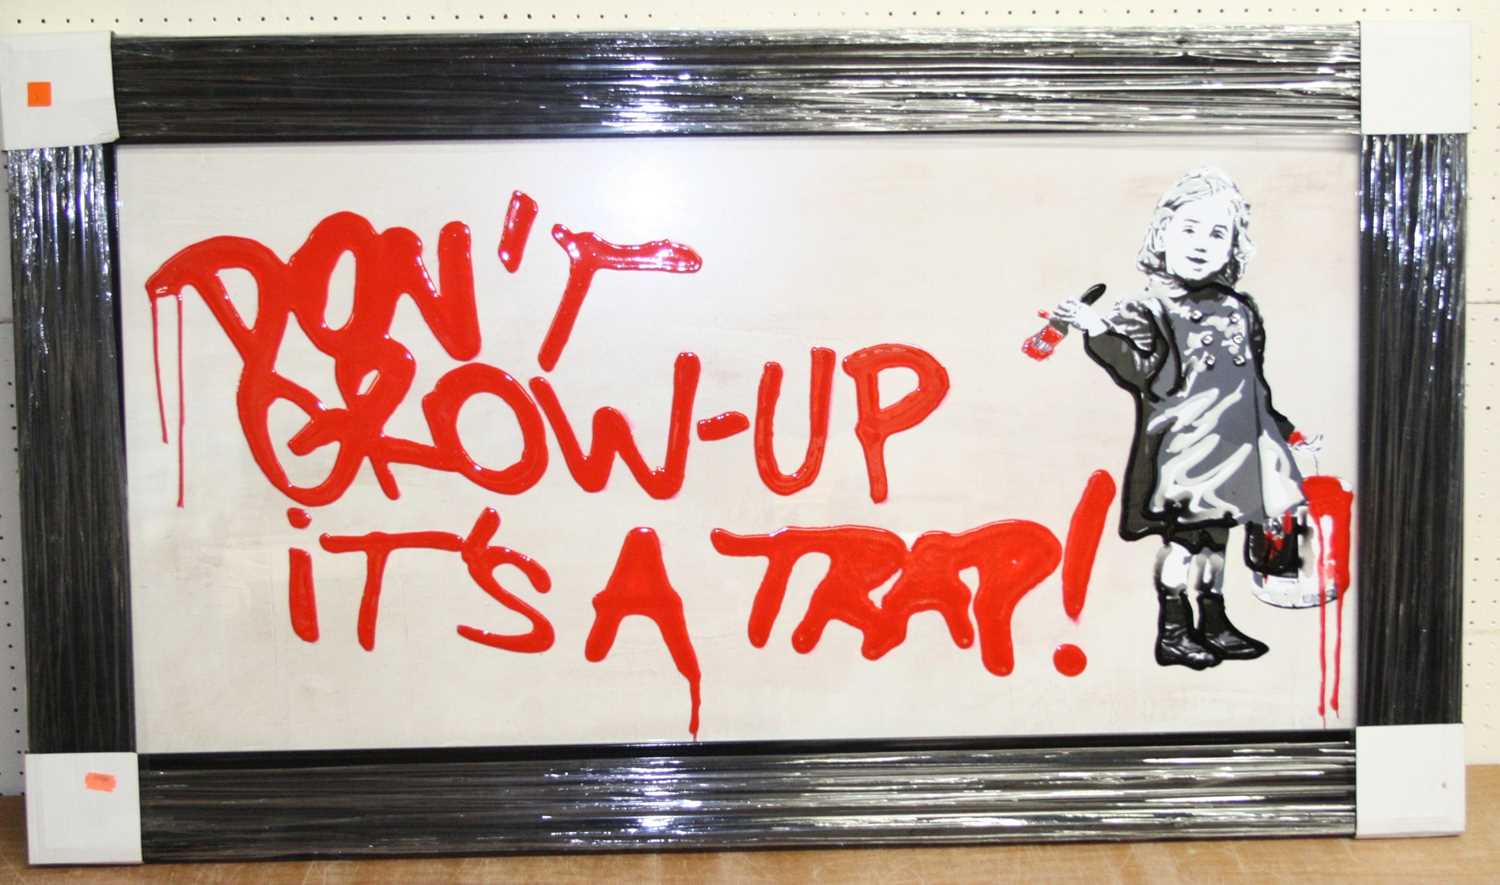 After Banksy - Don't grow up, it's a trap, mixed media, 49 x 99cm